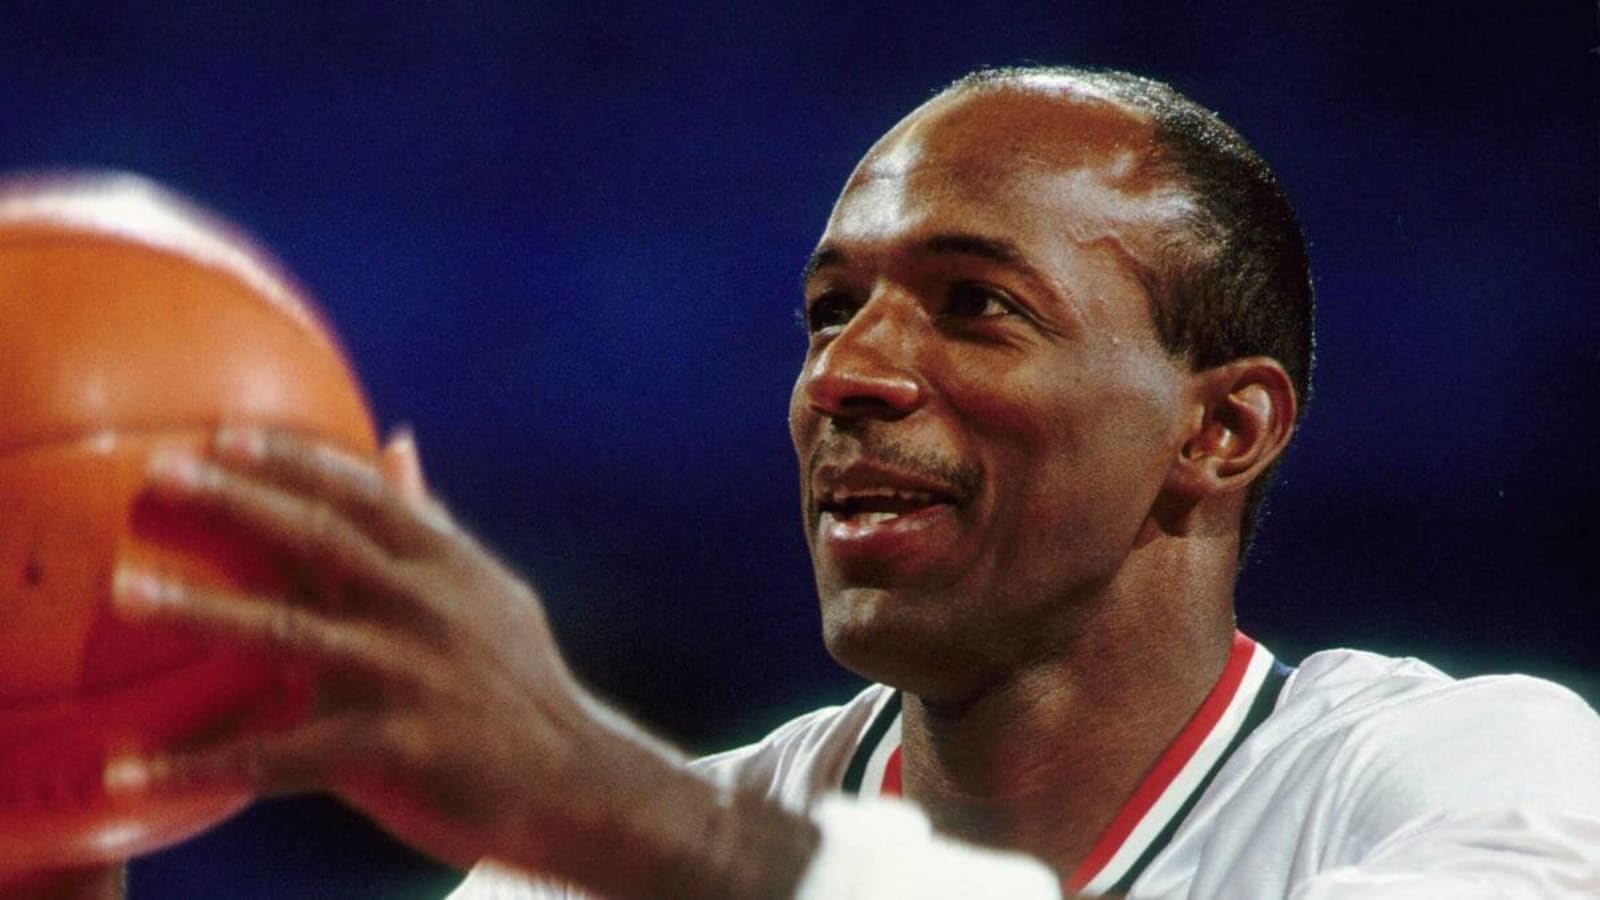 How Michael Jordan treated Clyde Drexler on the Dream Team: "Think you can stop me this time, Clyde?"